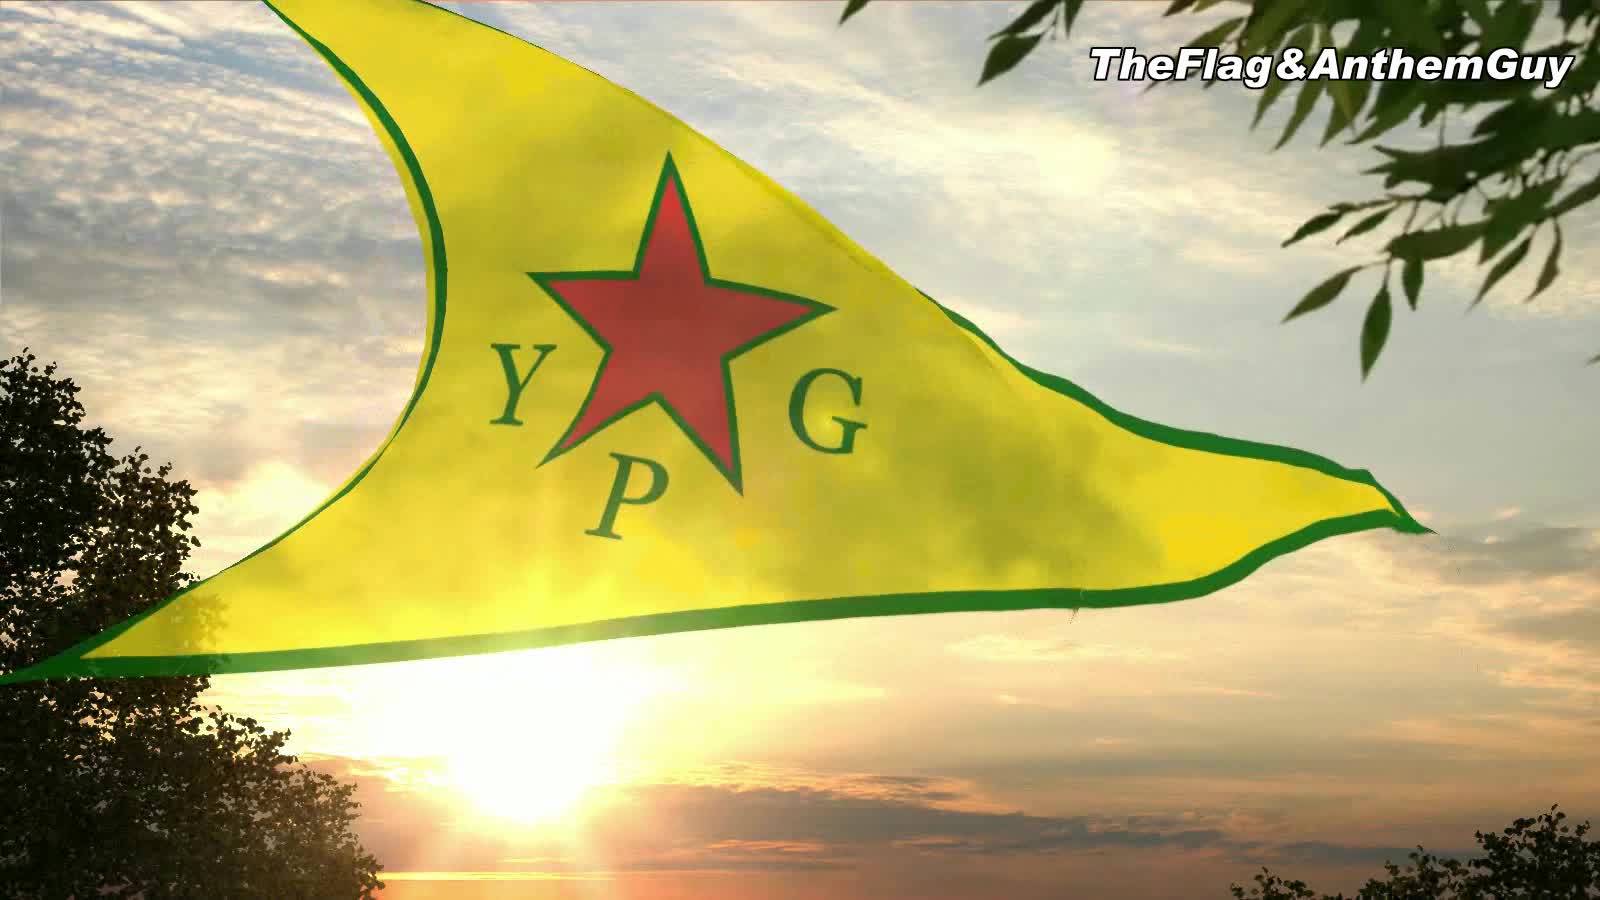 YPG - Go on home turkish soldiers